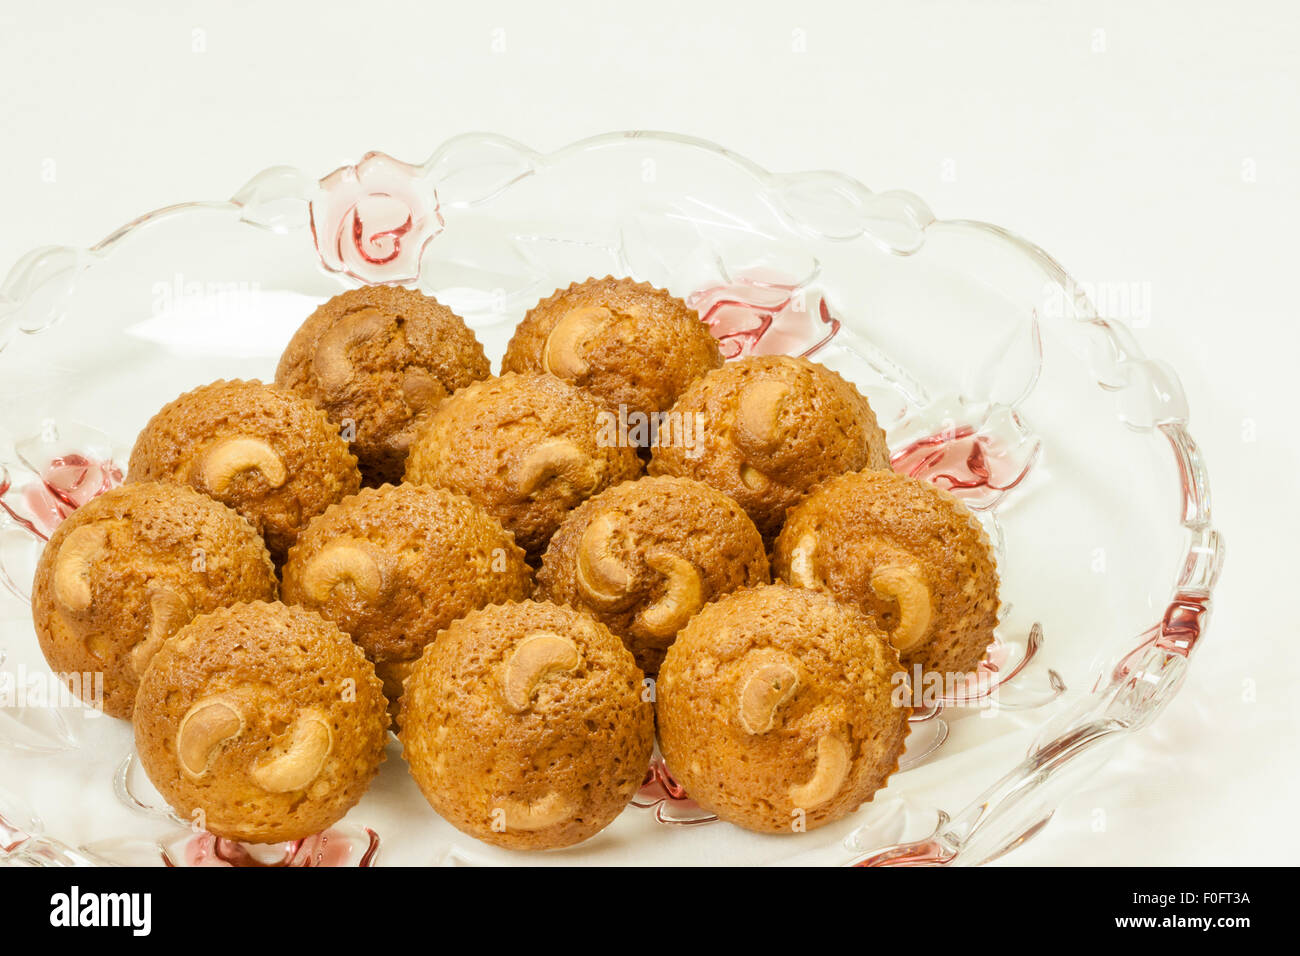 A closeup view of delicious, freshly baked, golden brown crusted cashew cupcakes served on an elegant glass tray. Stock Photo